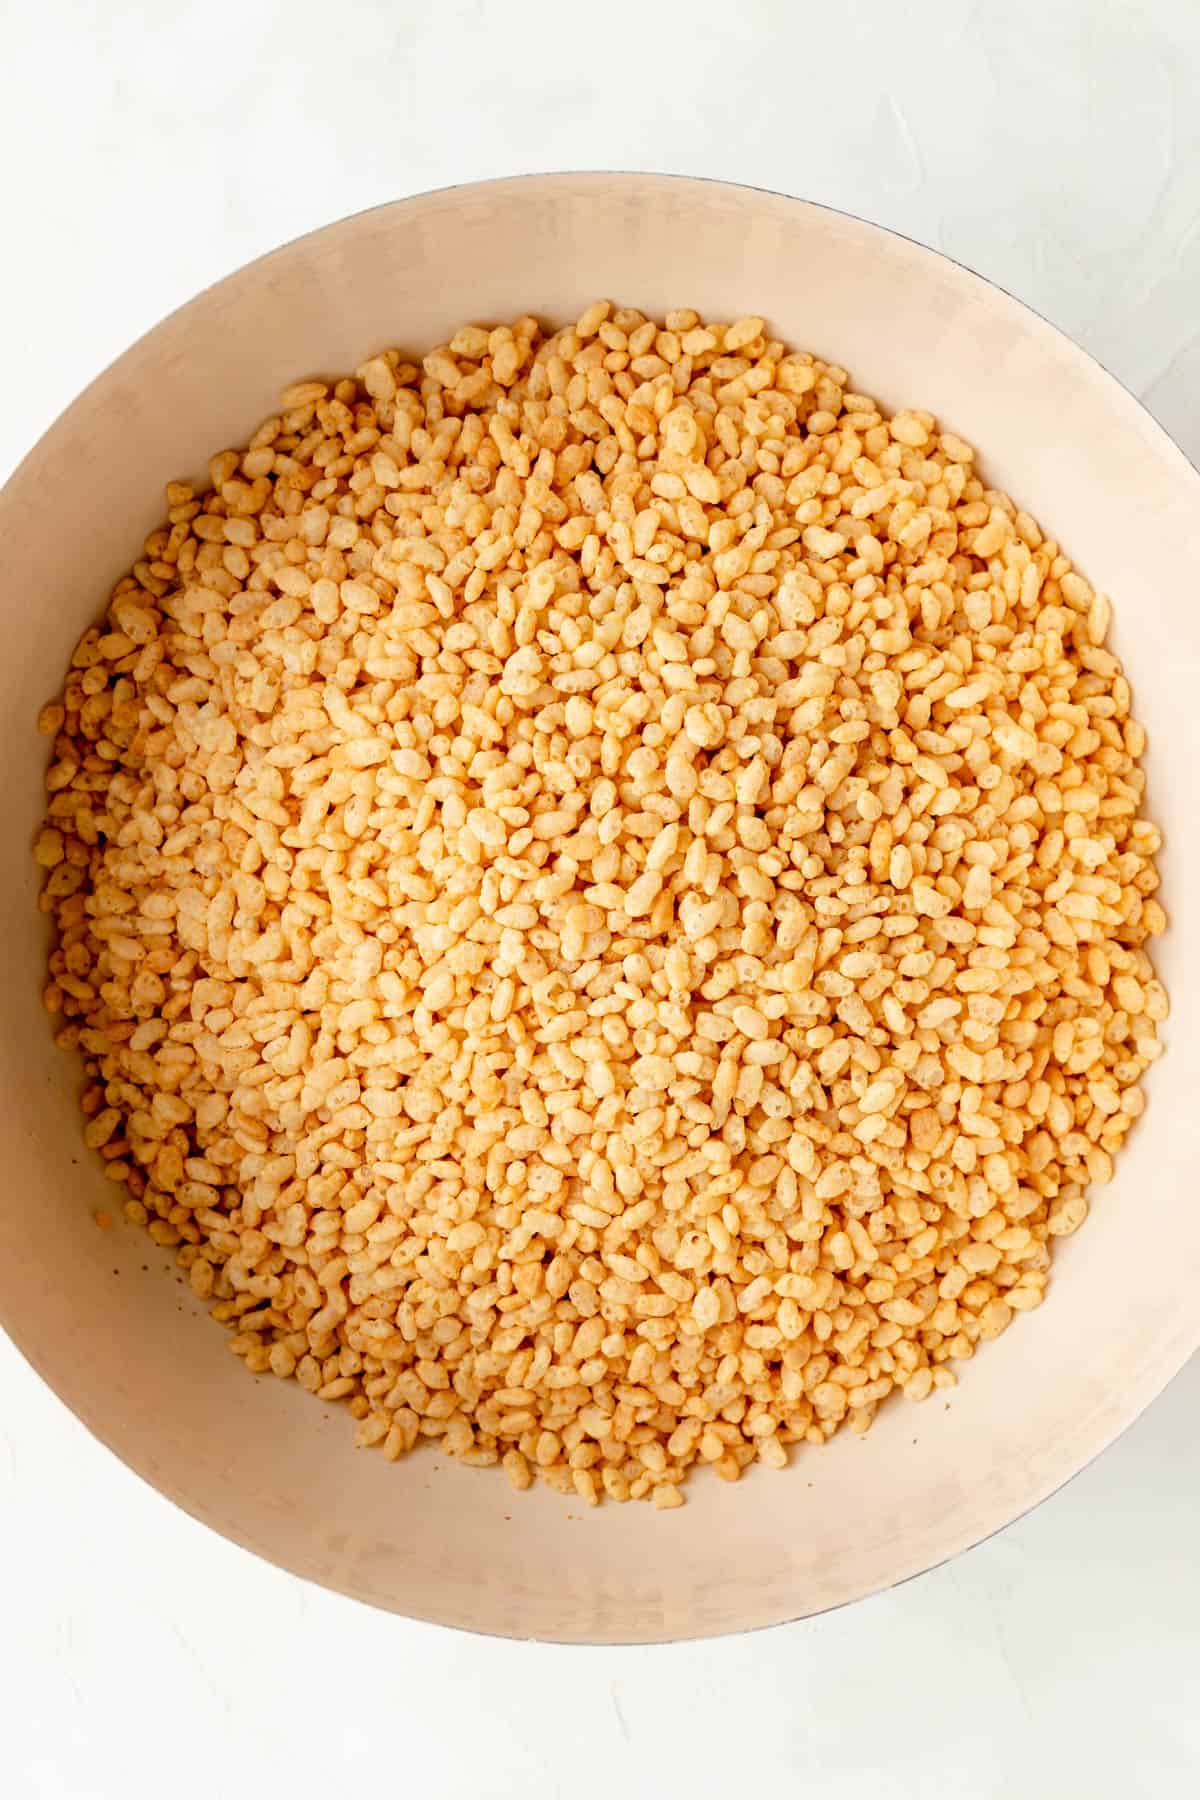 Large tan mixing bowl filled with rice crispy cereal on white background.